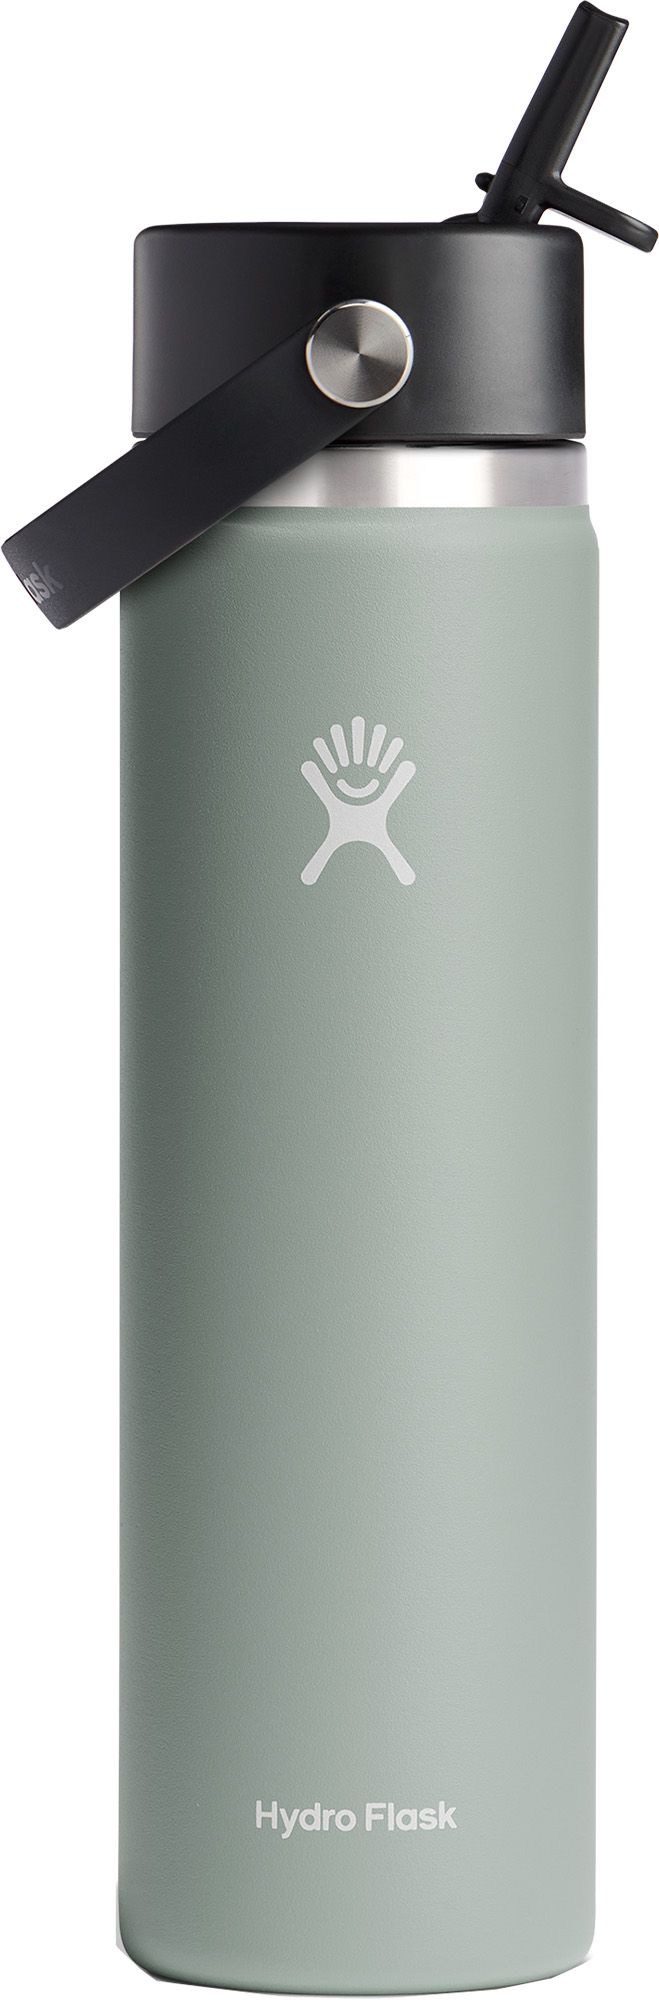 Owala Stainless Steel Water Bottle - 32 Oz - 2 Pack – Contarmarket